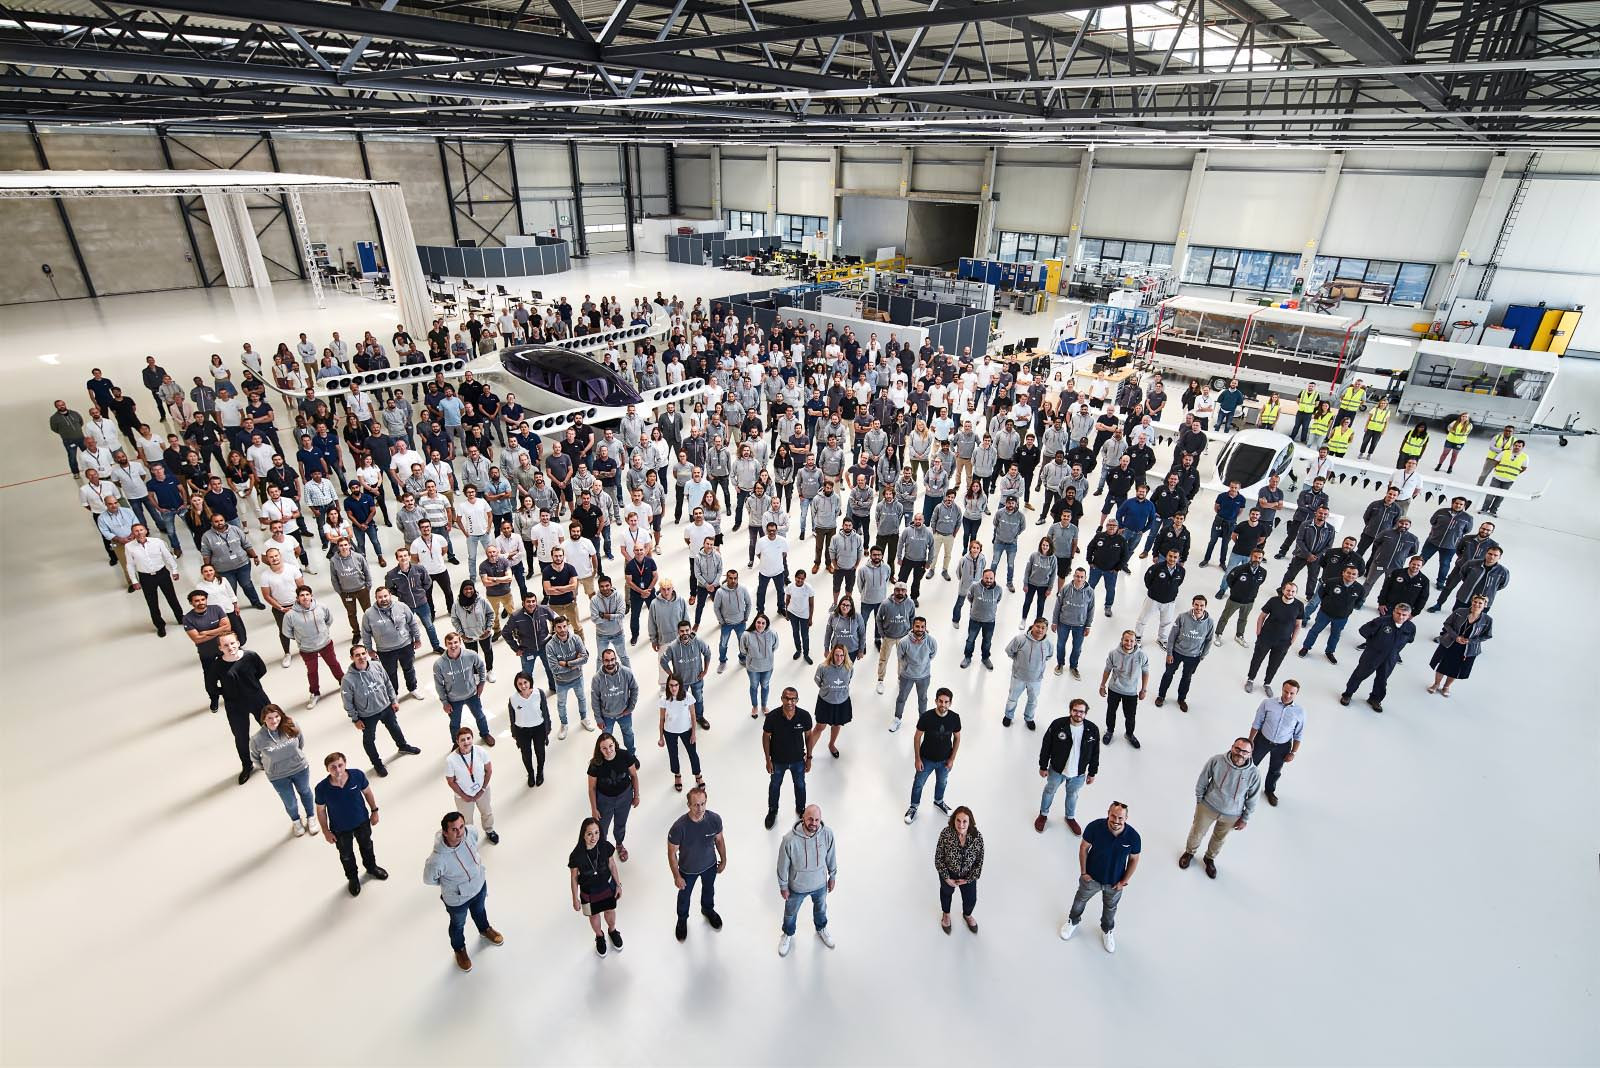 Shoot with 250 Lilium employees in a Hangar here in Munich